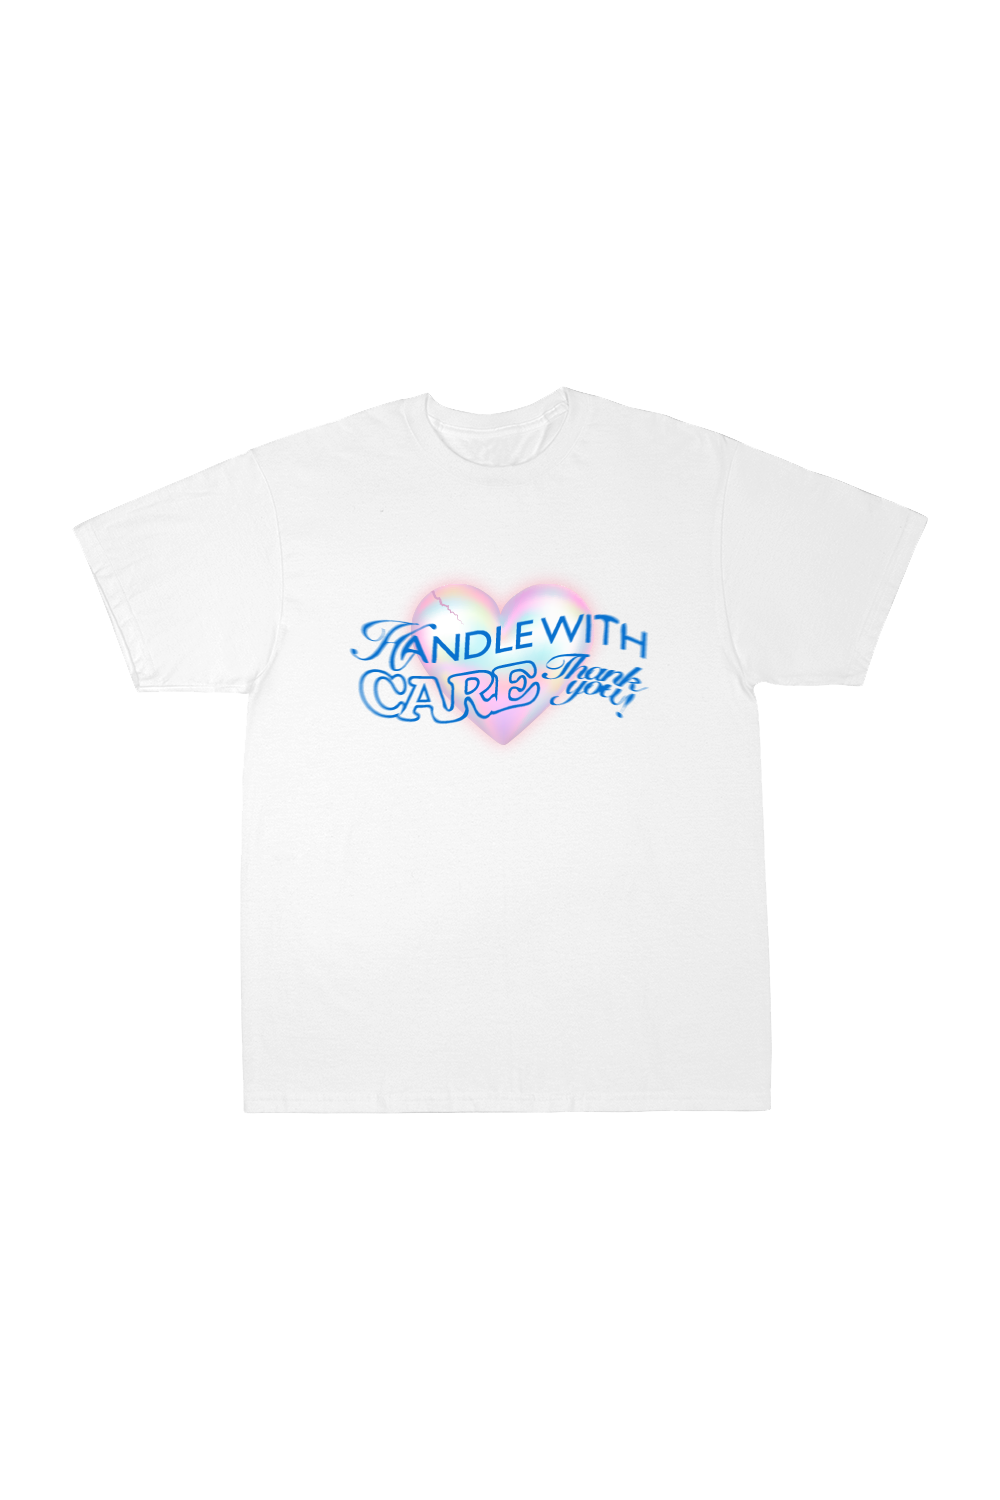 Handle With Care White Shirt